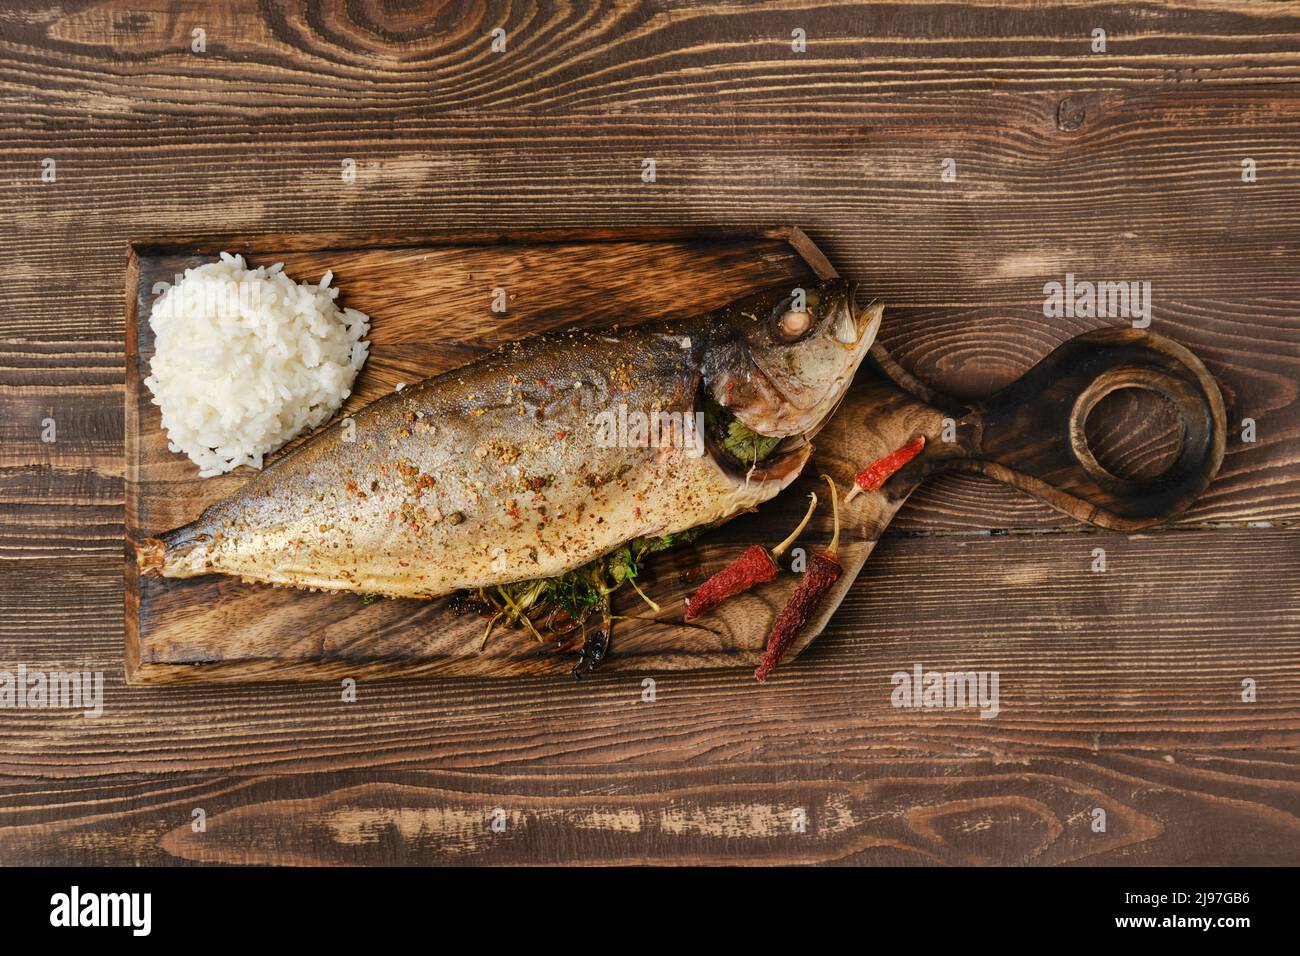 Yellow tailed mackerel with rice baked in oven on wooden cutting board, top view Stock Photo